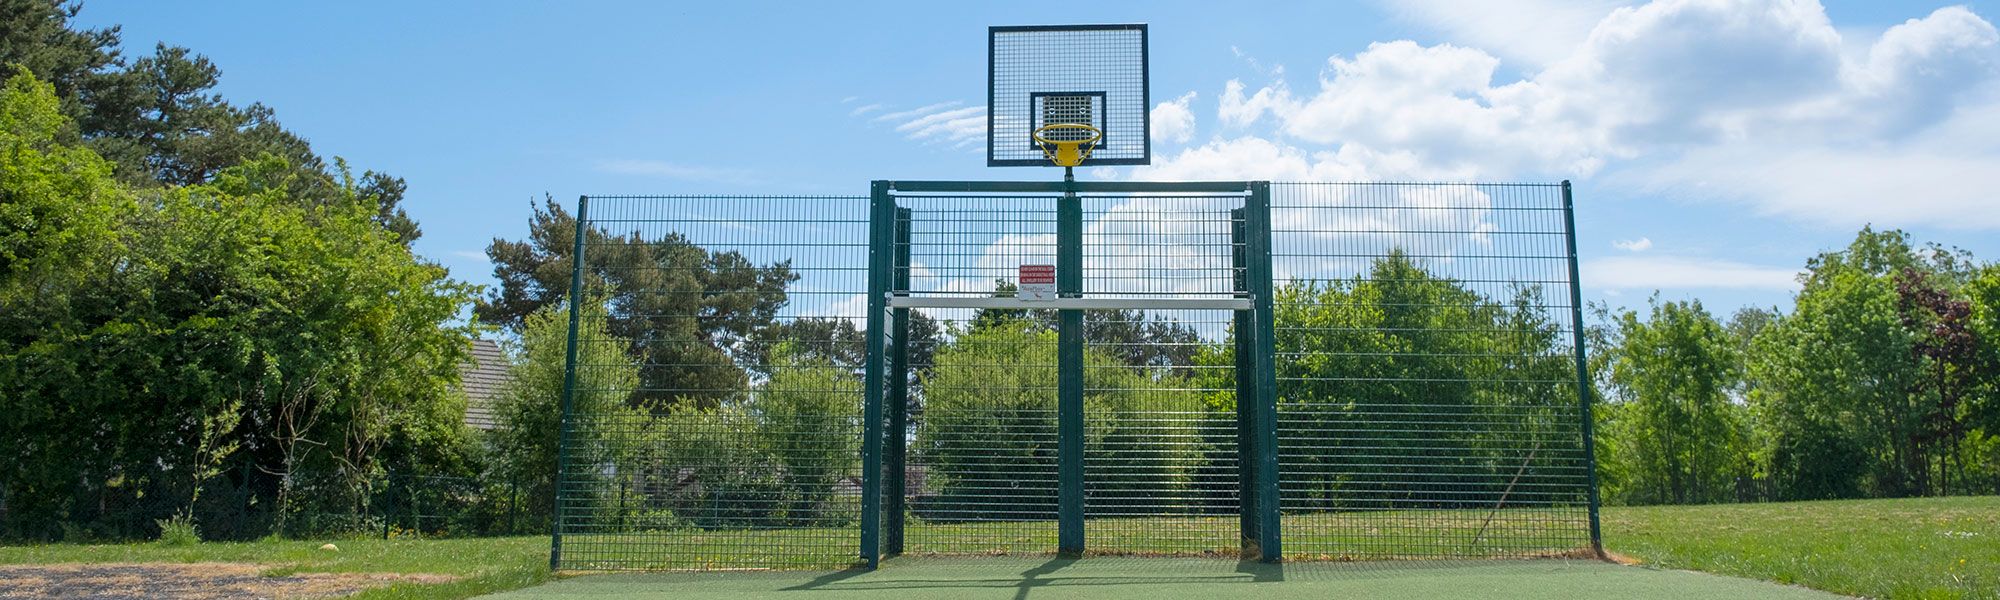 Basketball ring and court surface